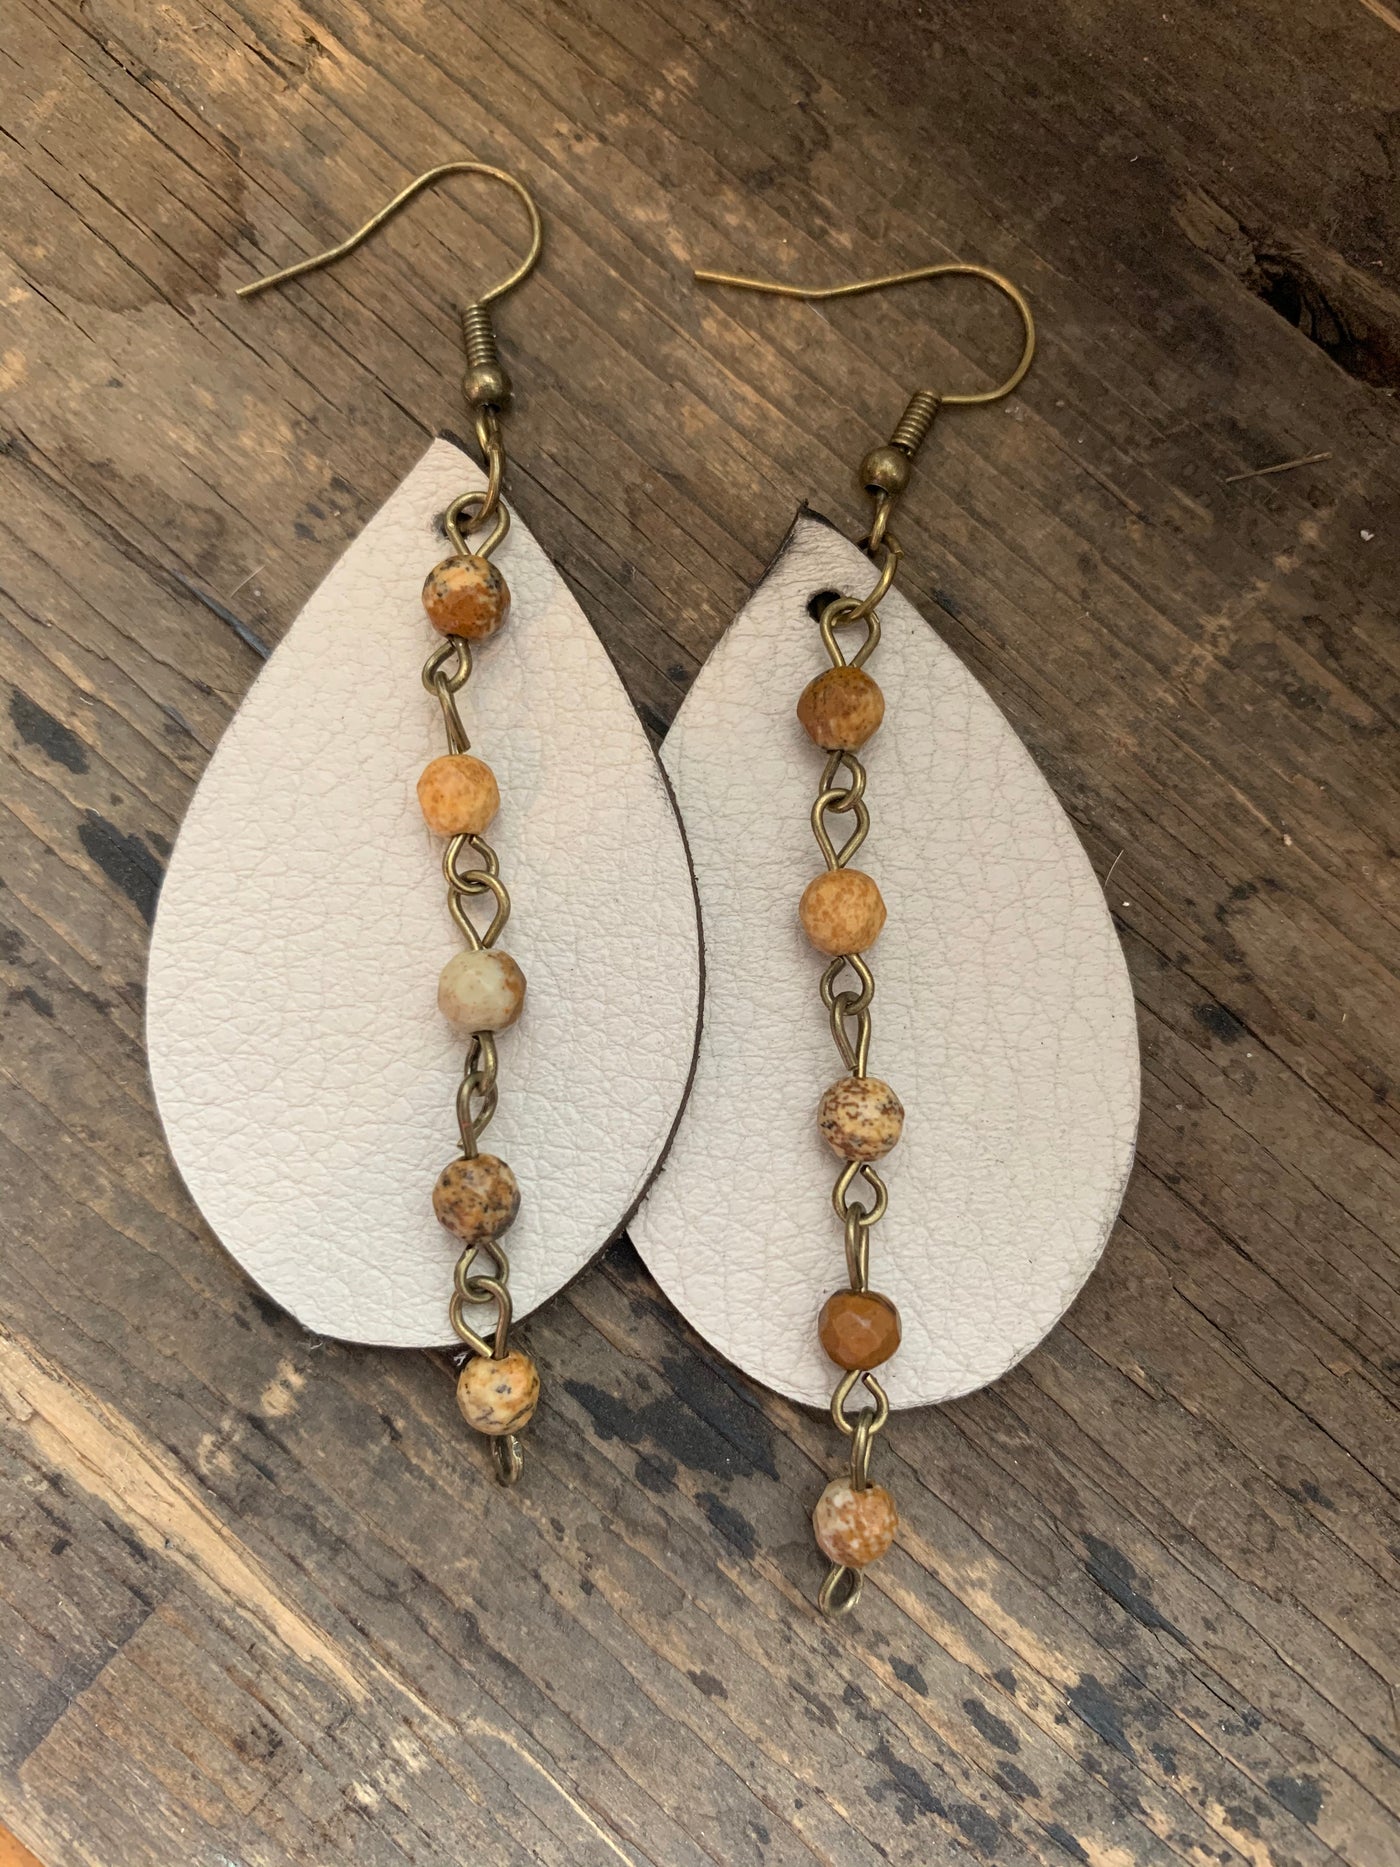 Cream Leather Earrings with Brown Gemstone Chain - Jill's Jewels | Unique, Handcrafted, Trendy, And Fun Jewelry